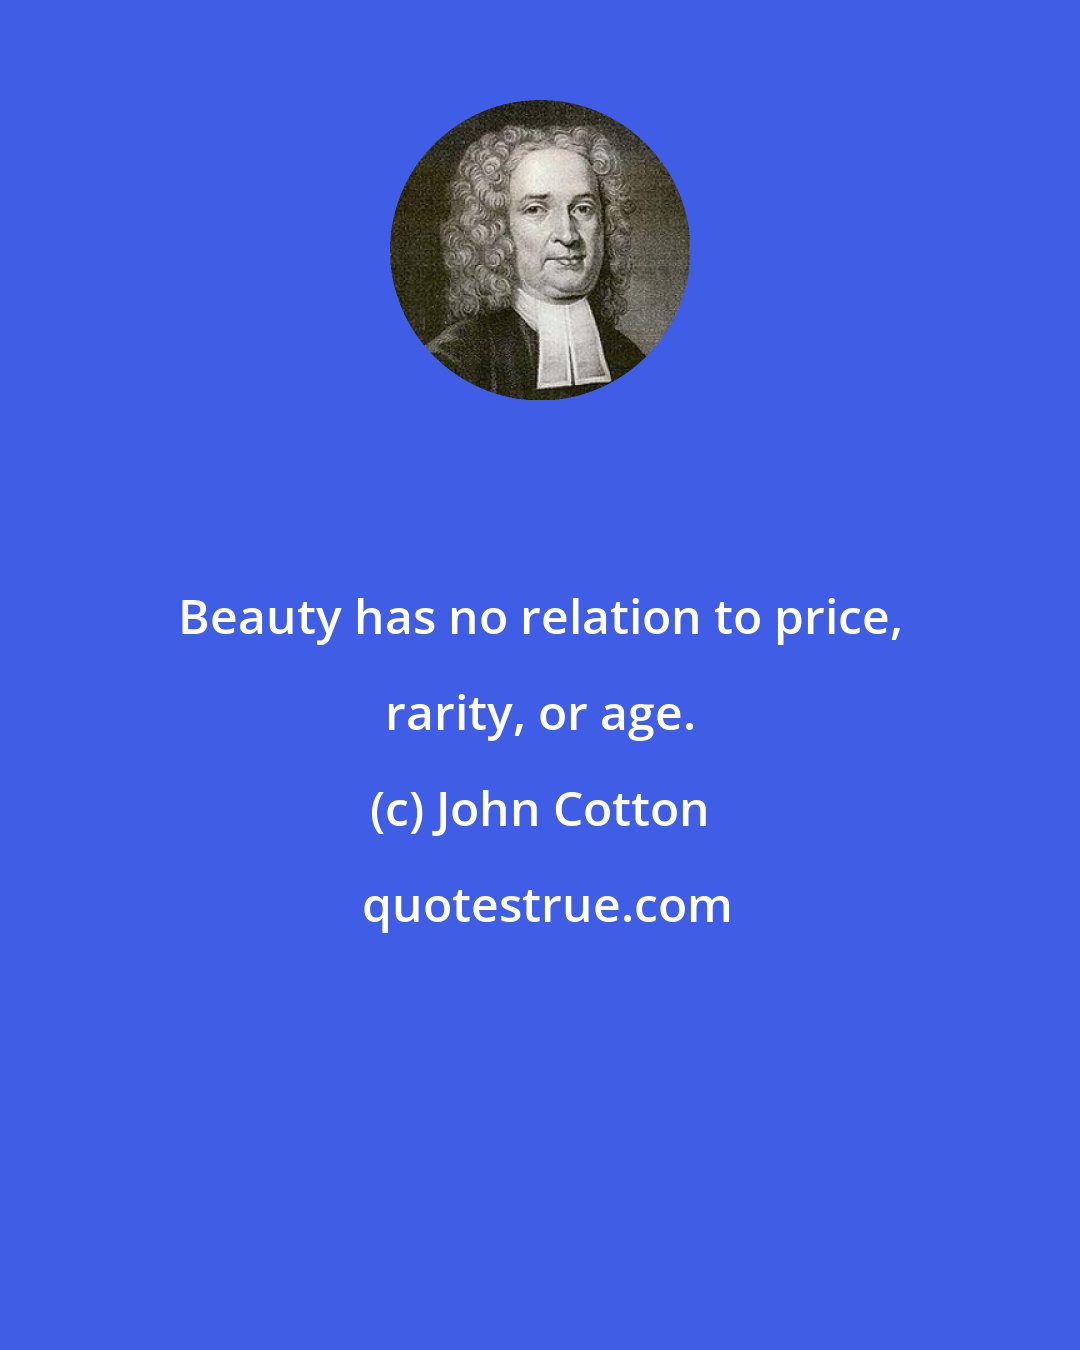 John Cotton: Beauty has no relation to price, rarity, or age.